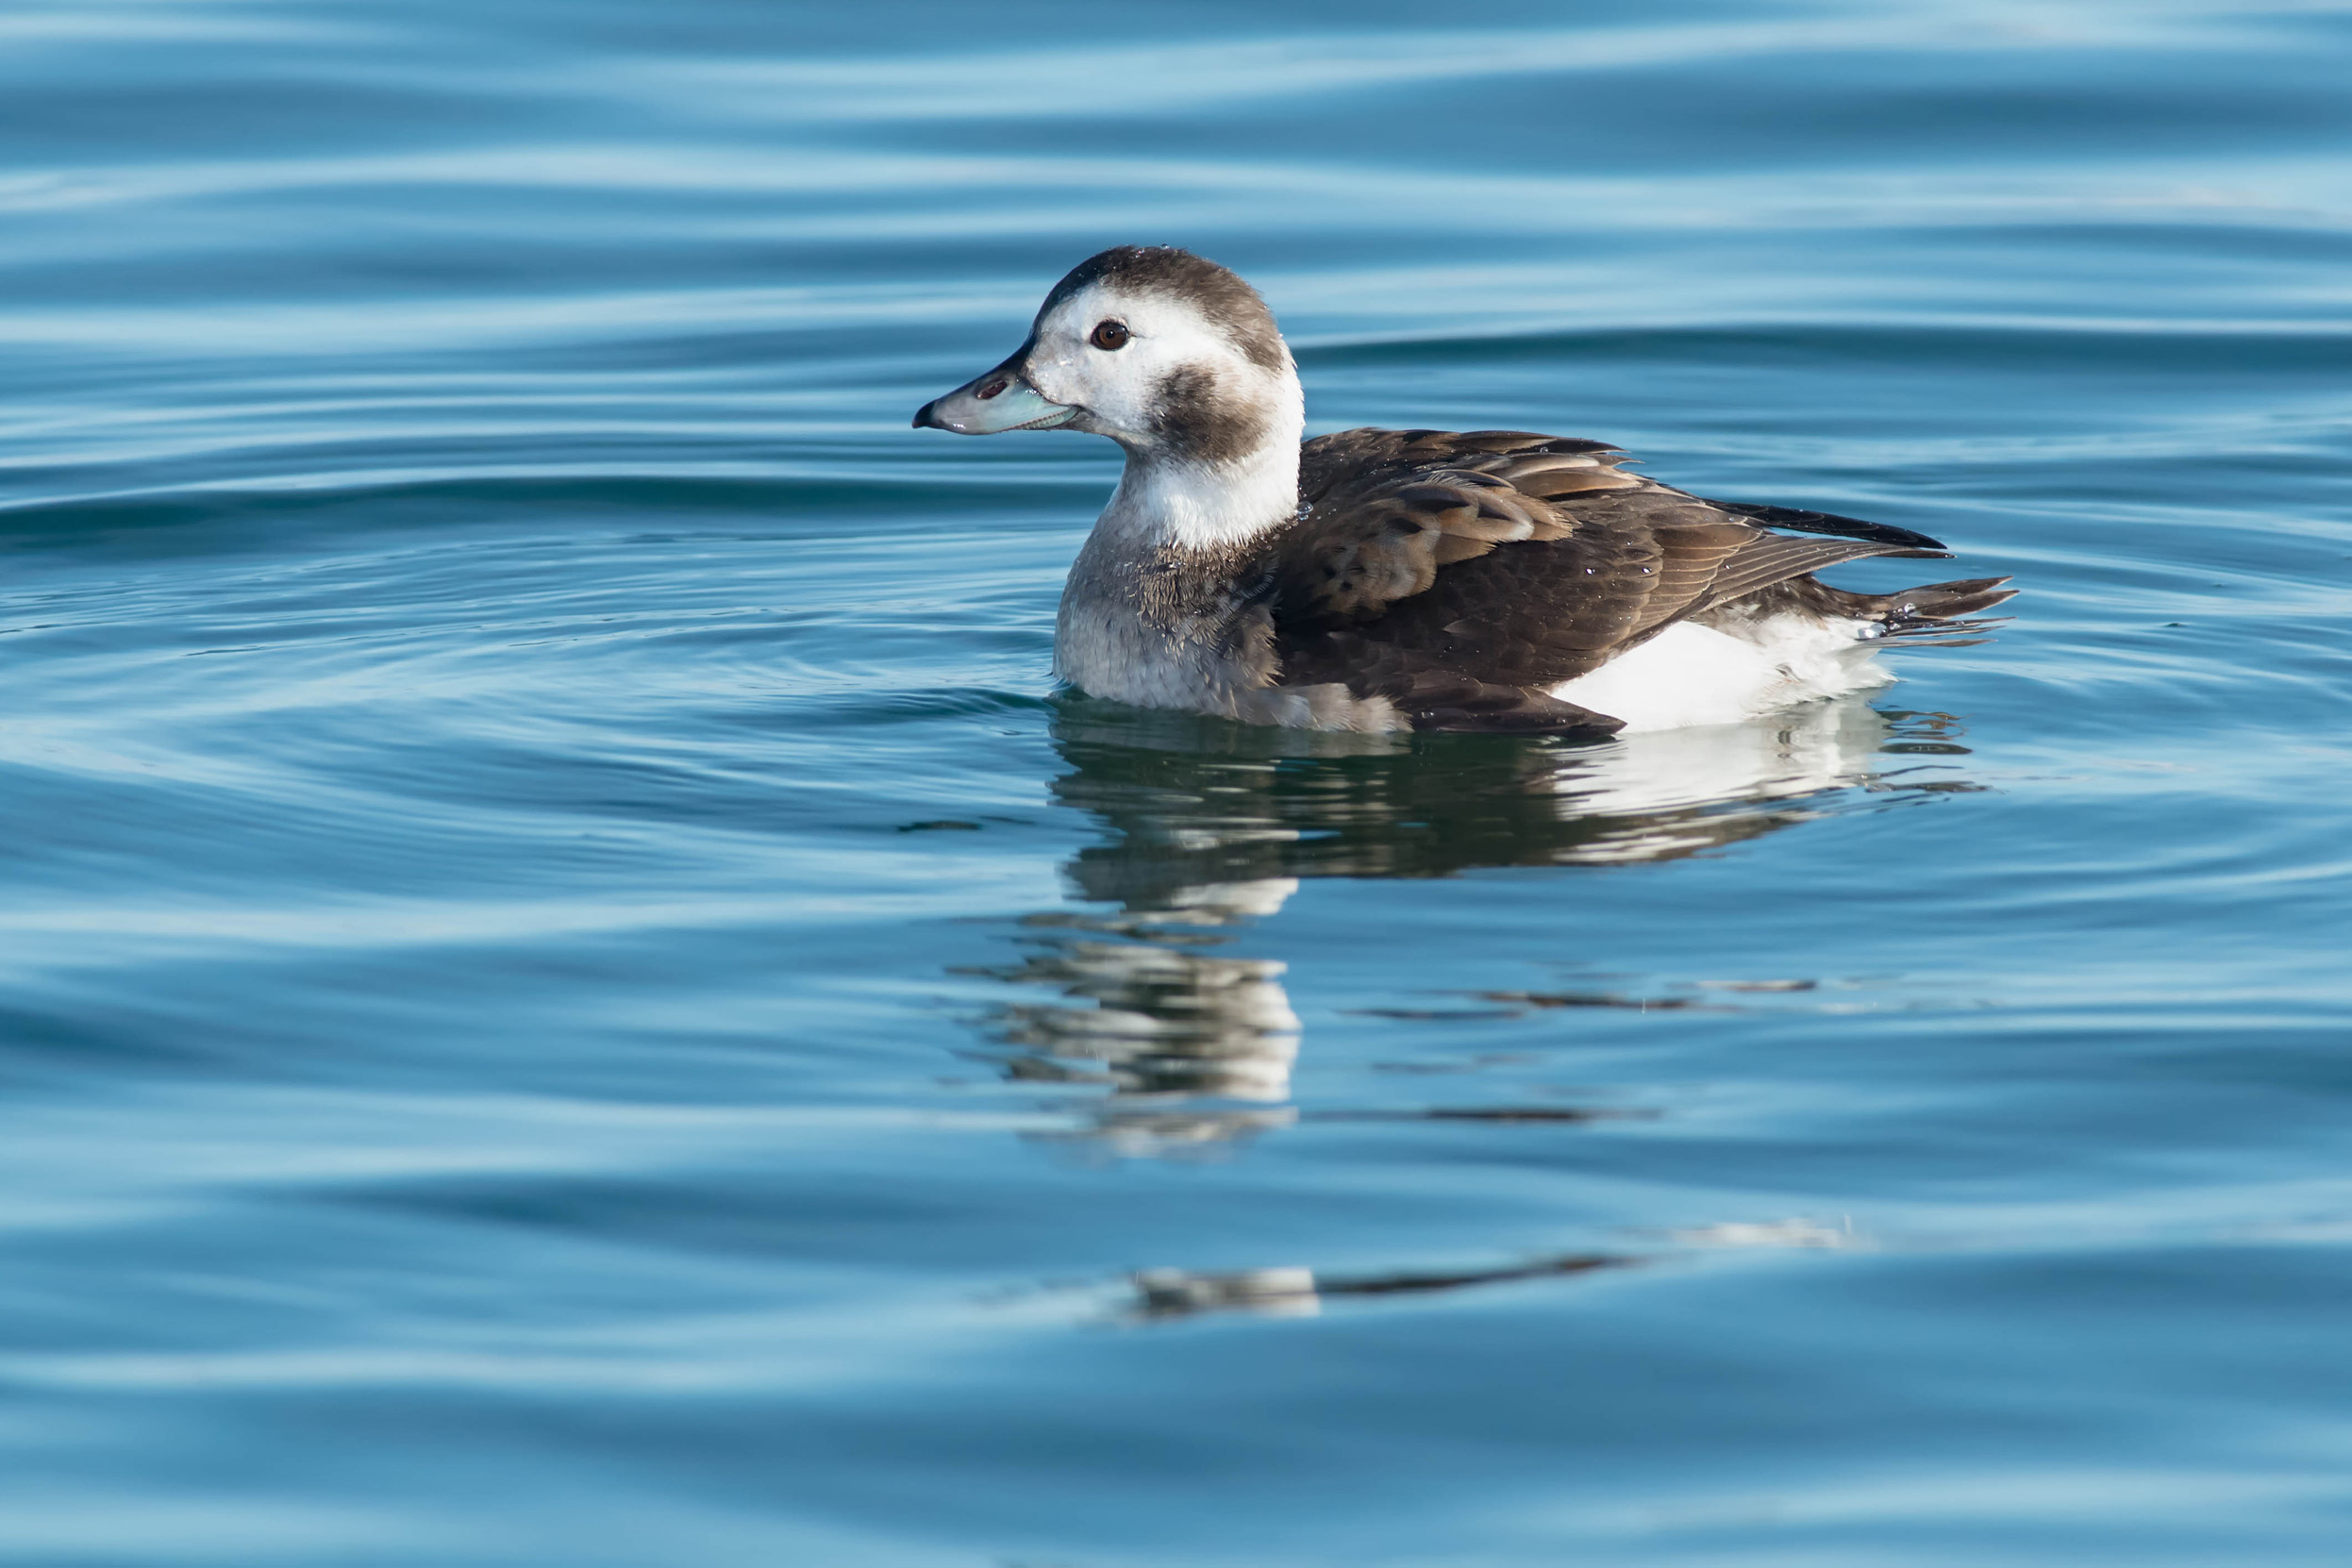 A female Long-tailed Duck swimming on crystal blue water surrounded by ripples.